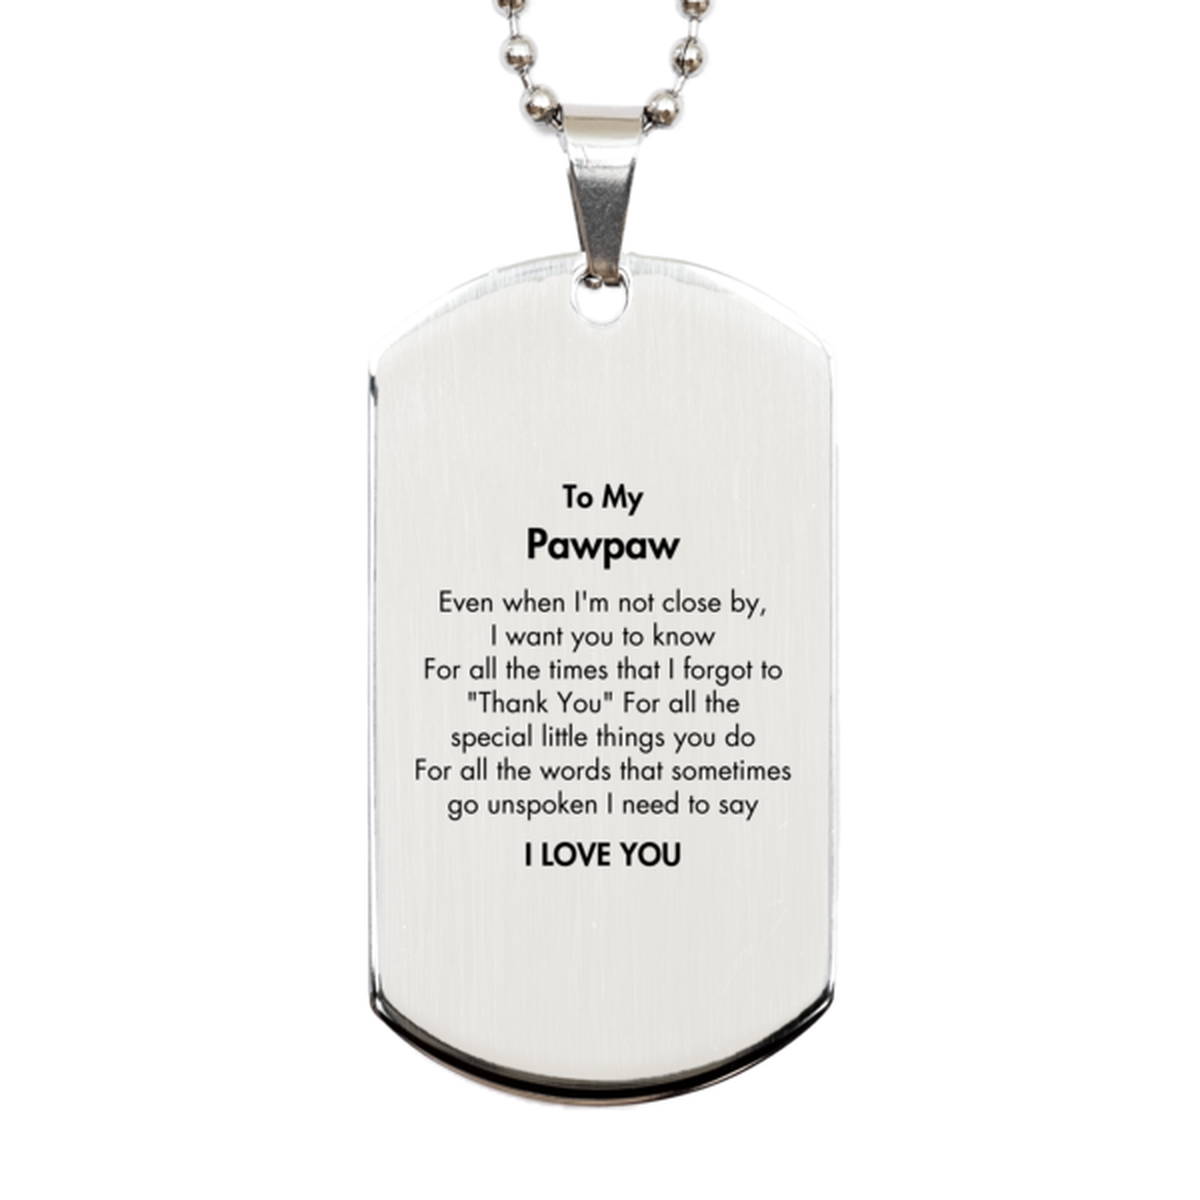 Thank You Gifts for Pawpaw, Keepsake Silver Dog Tag Gifts for Pawpaw Birthday Mother's day Father's Day Pawpaw For all the words That sometimes go unspoken I need to say I LOVE YOU